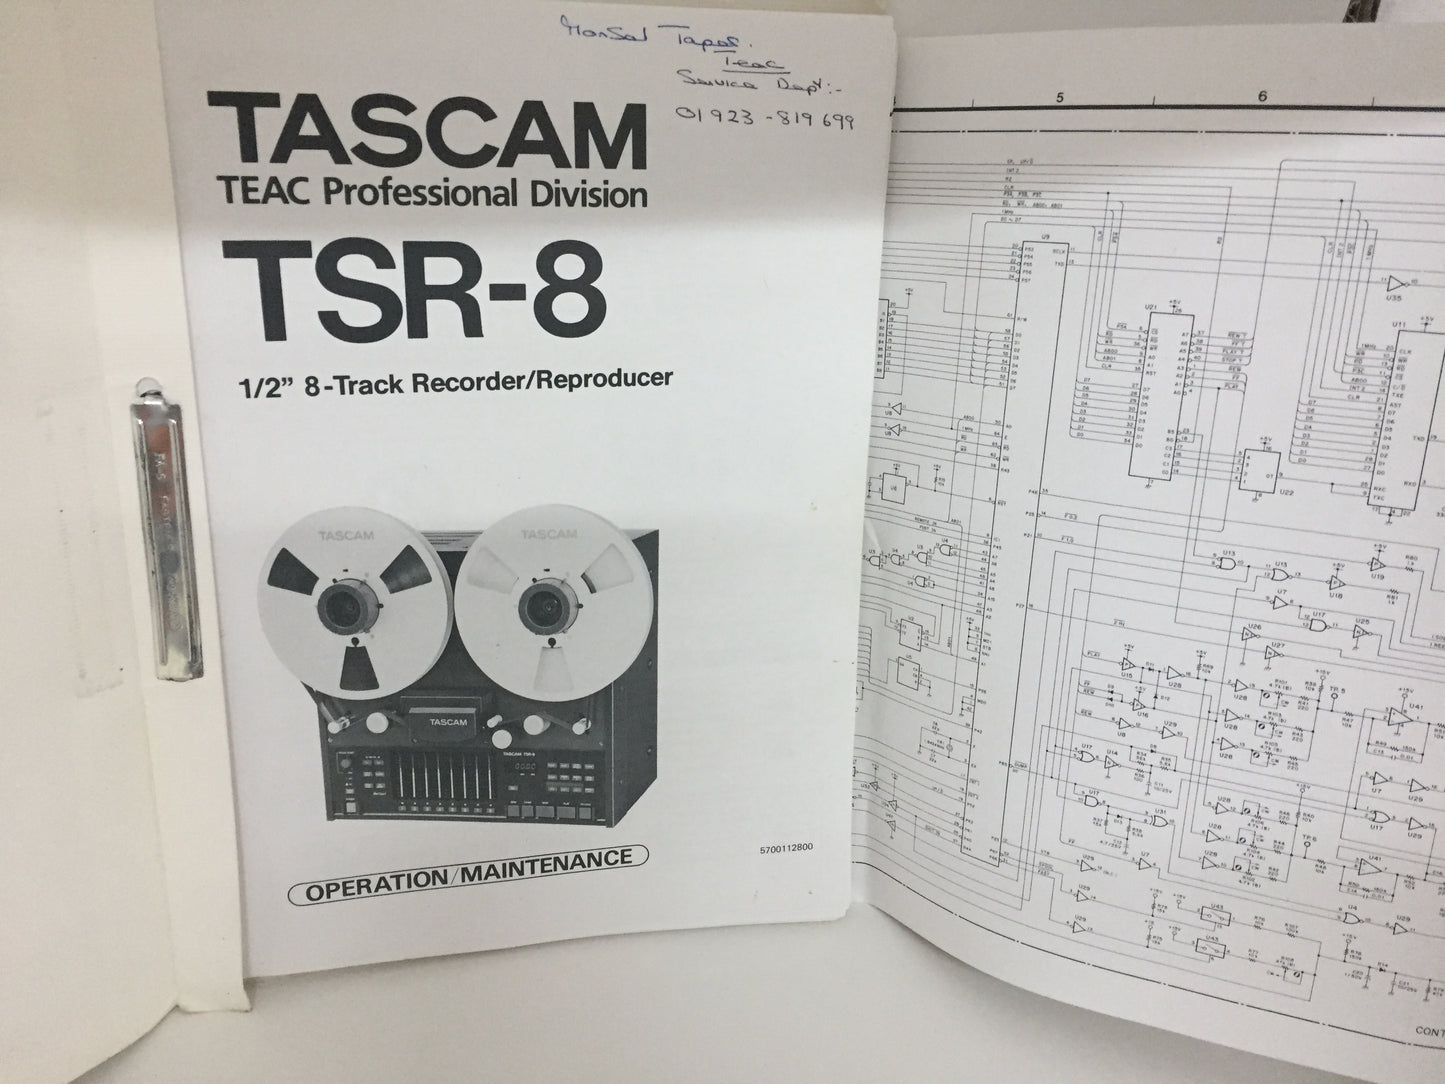 TASCAM TSR-8 OPERATION/MAINTENANCE TEAC Professional Division